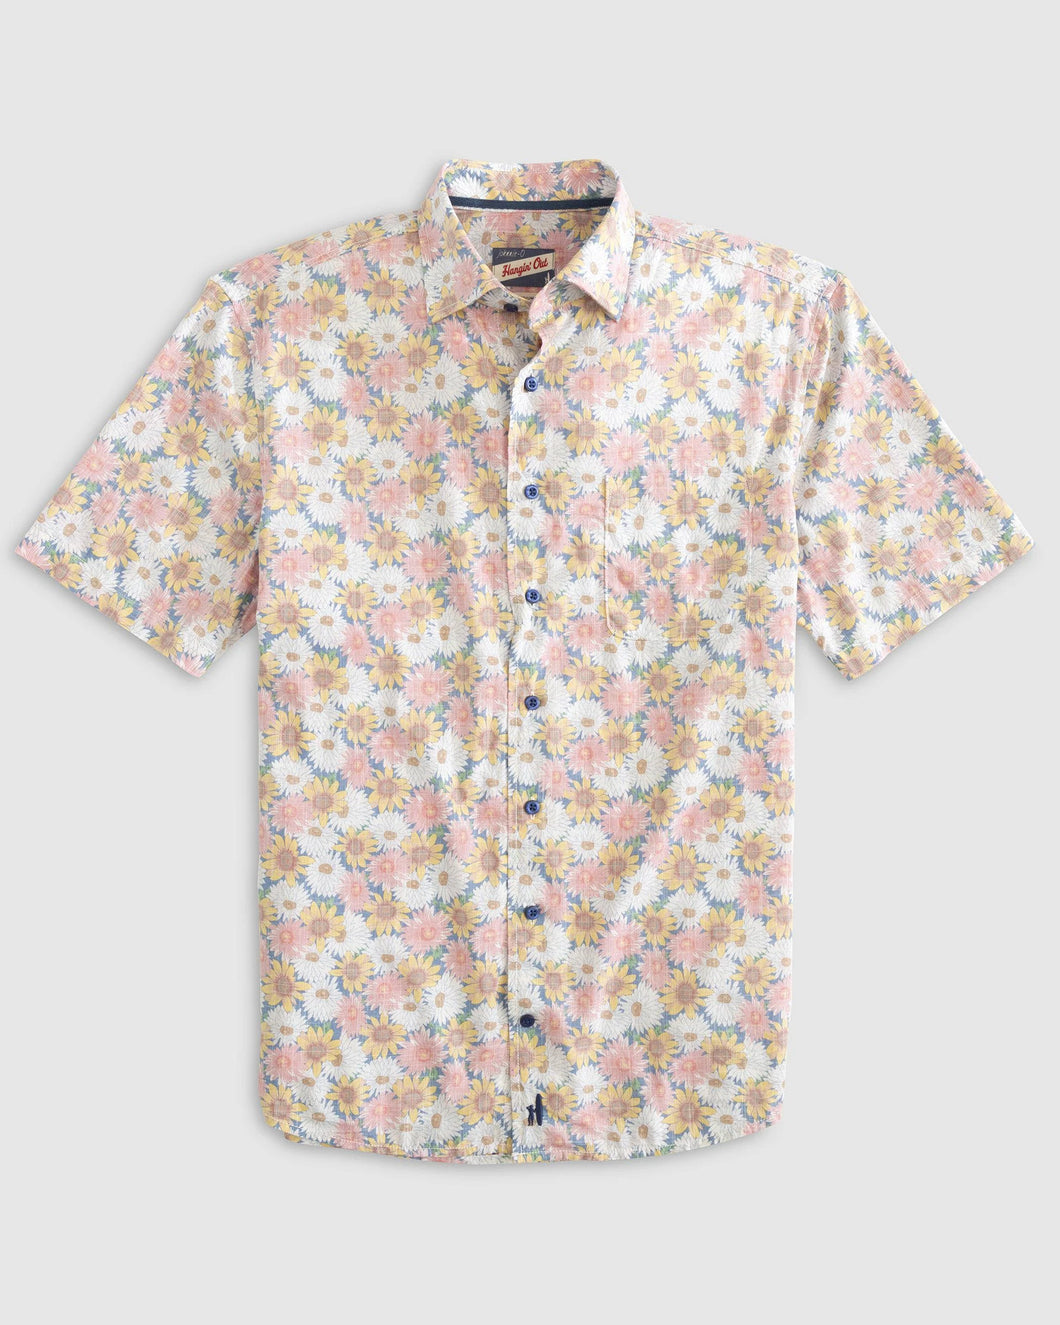 Johnnie-O Jens Hangin' Out Button Up Shirt in Confetti